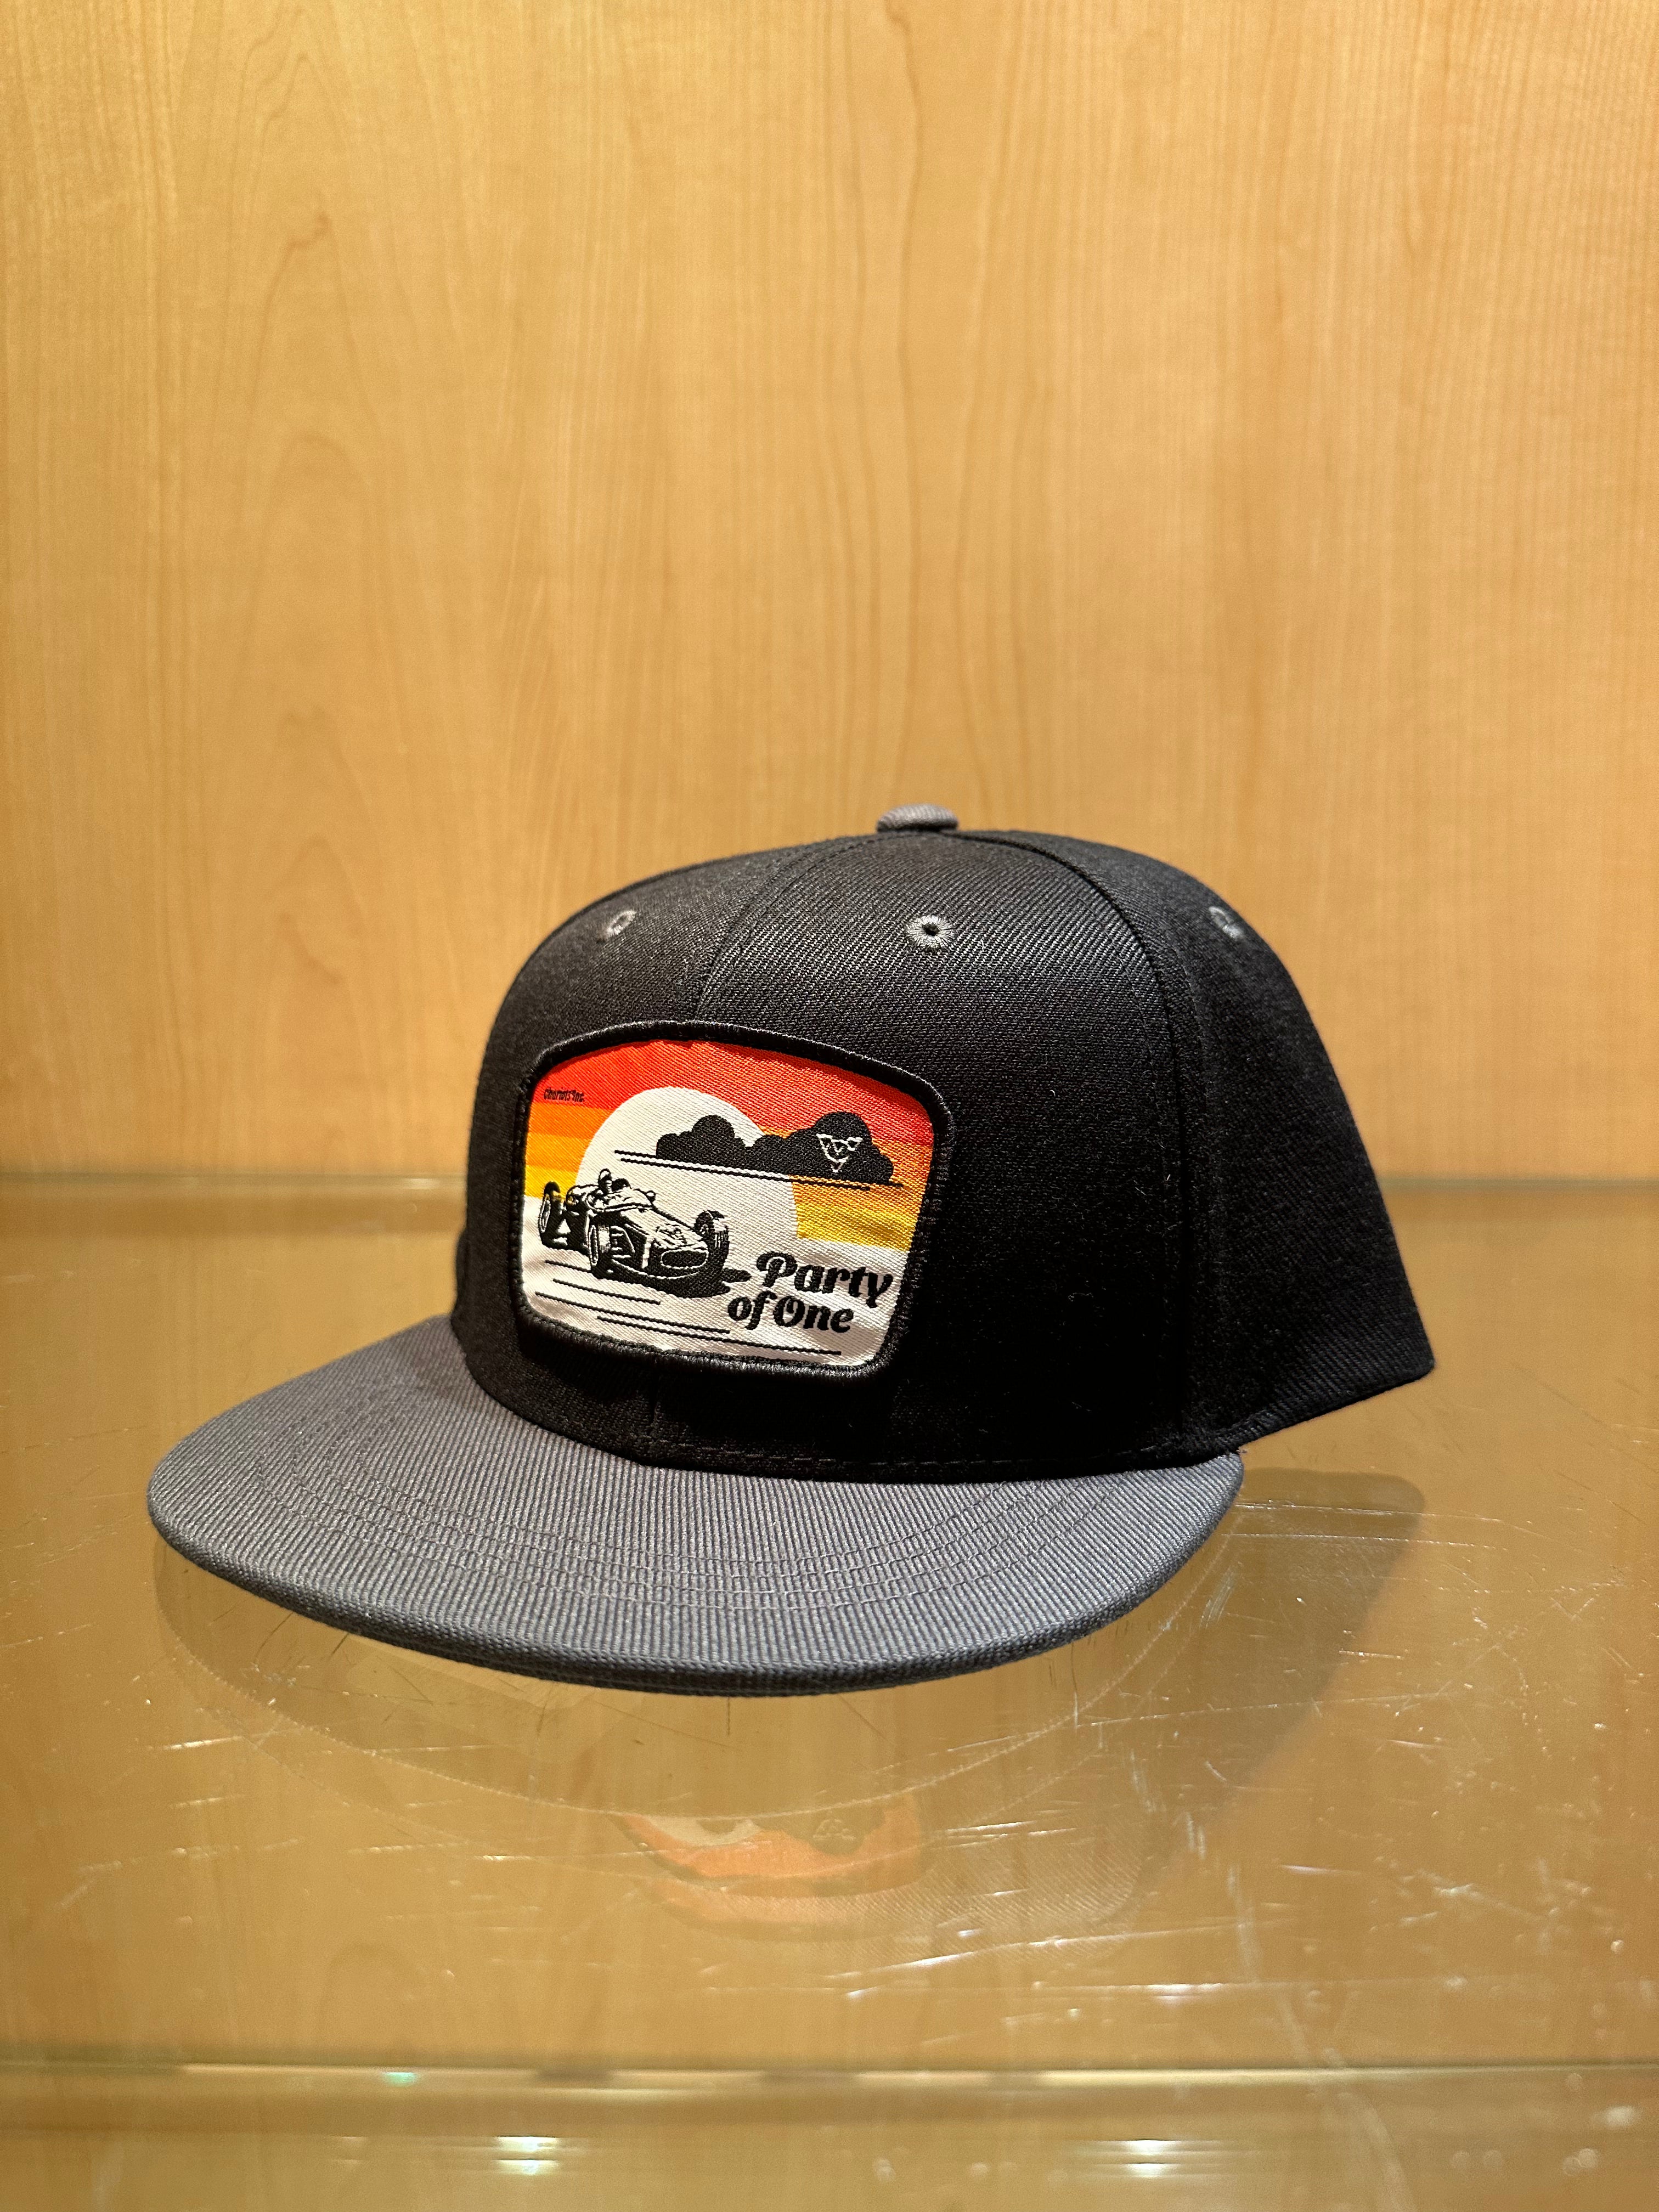 PARTY OF ONE YOUTH FLAT BILL HAT (Black/Charcoal)